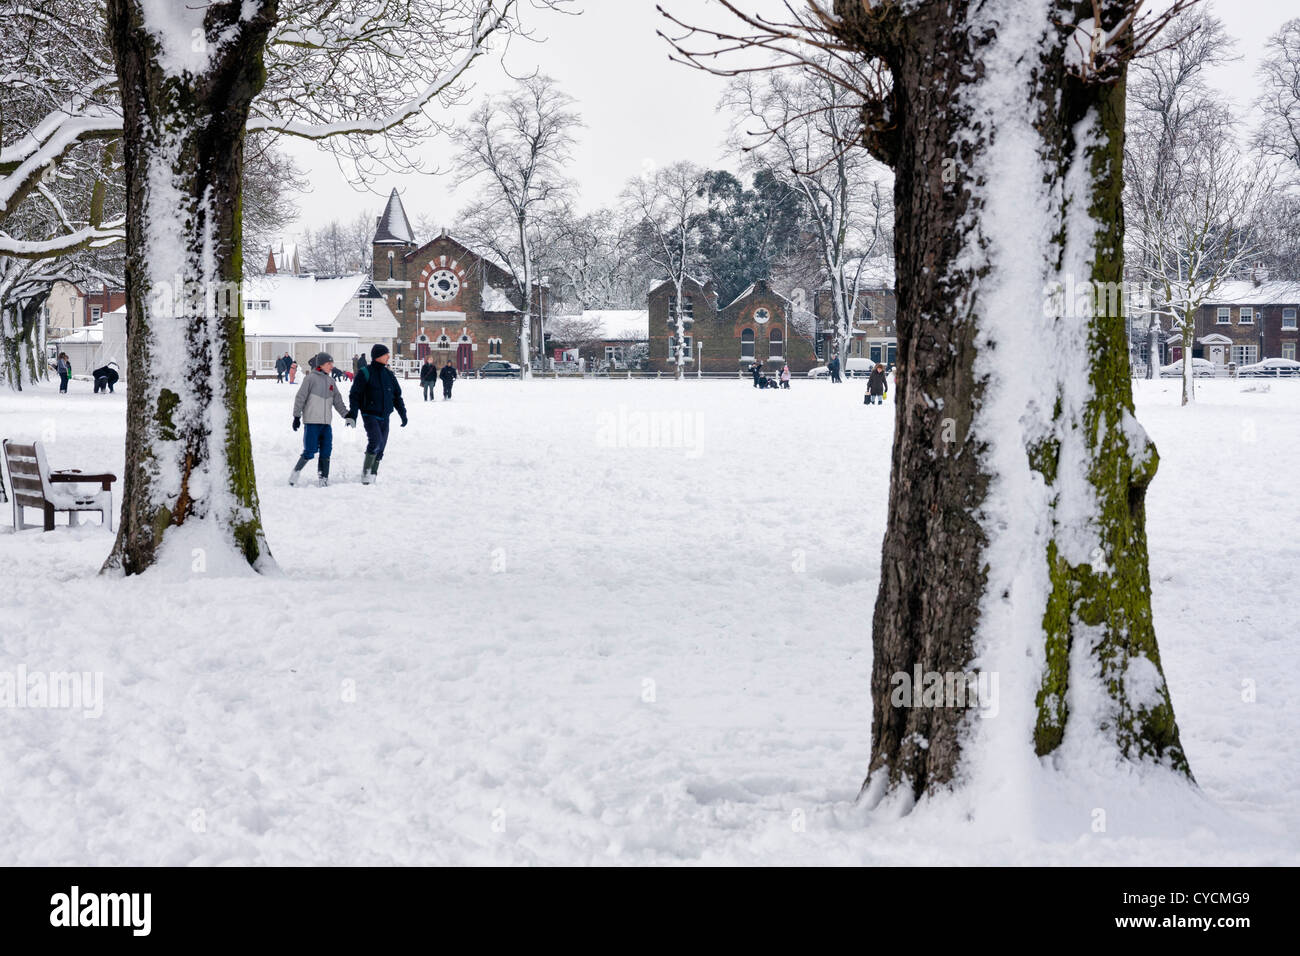 A view of the cricket pavilion, church and snow covered trees on Twickenham Green Stock Photo